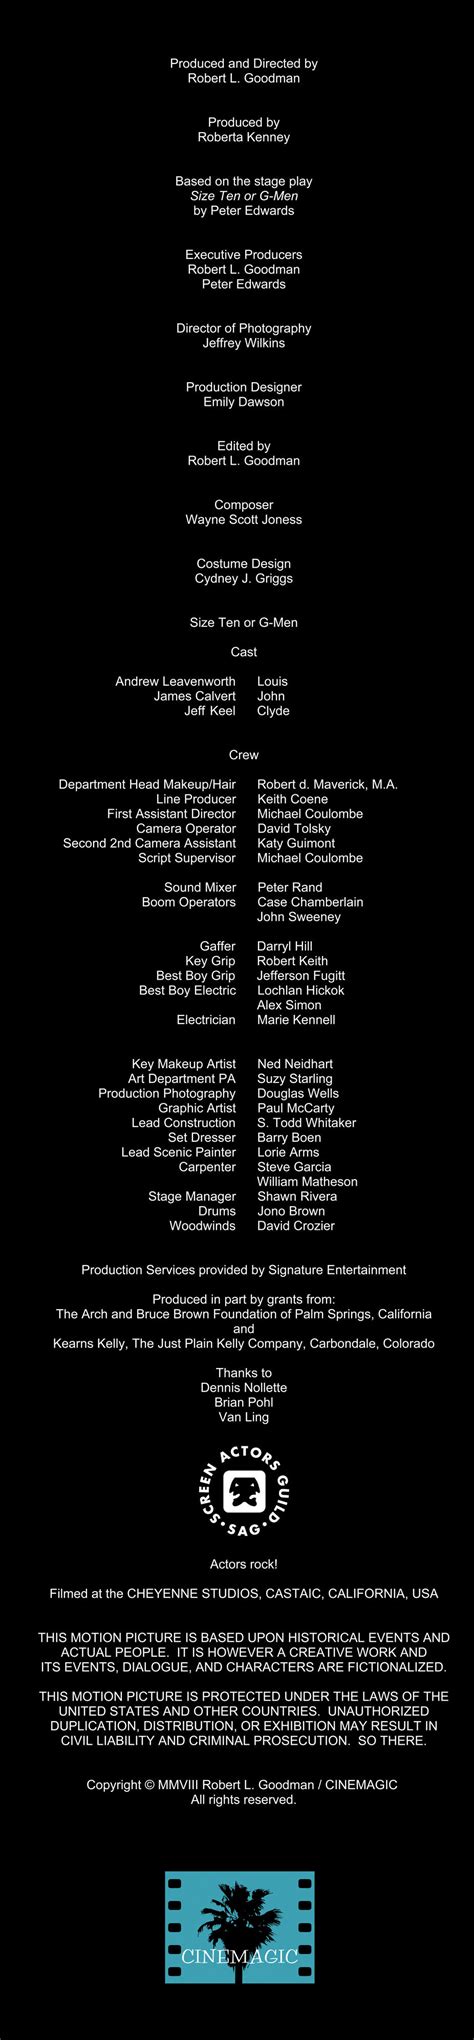 My Mission is Possible lyrics credits, cast, crew of song